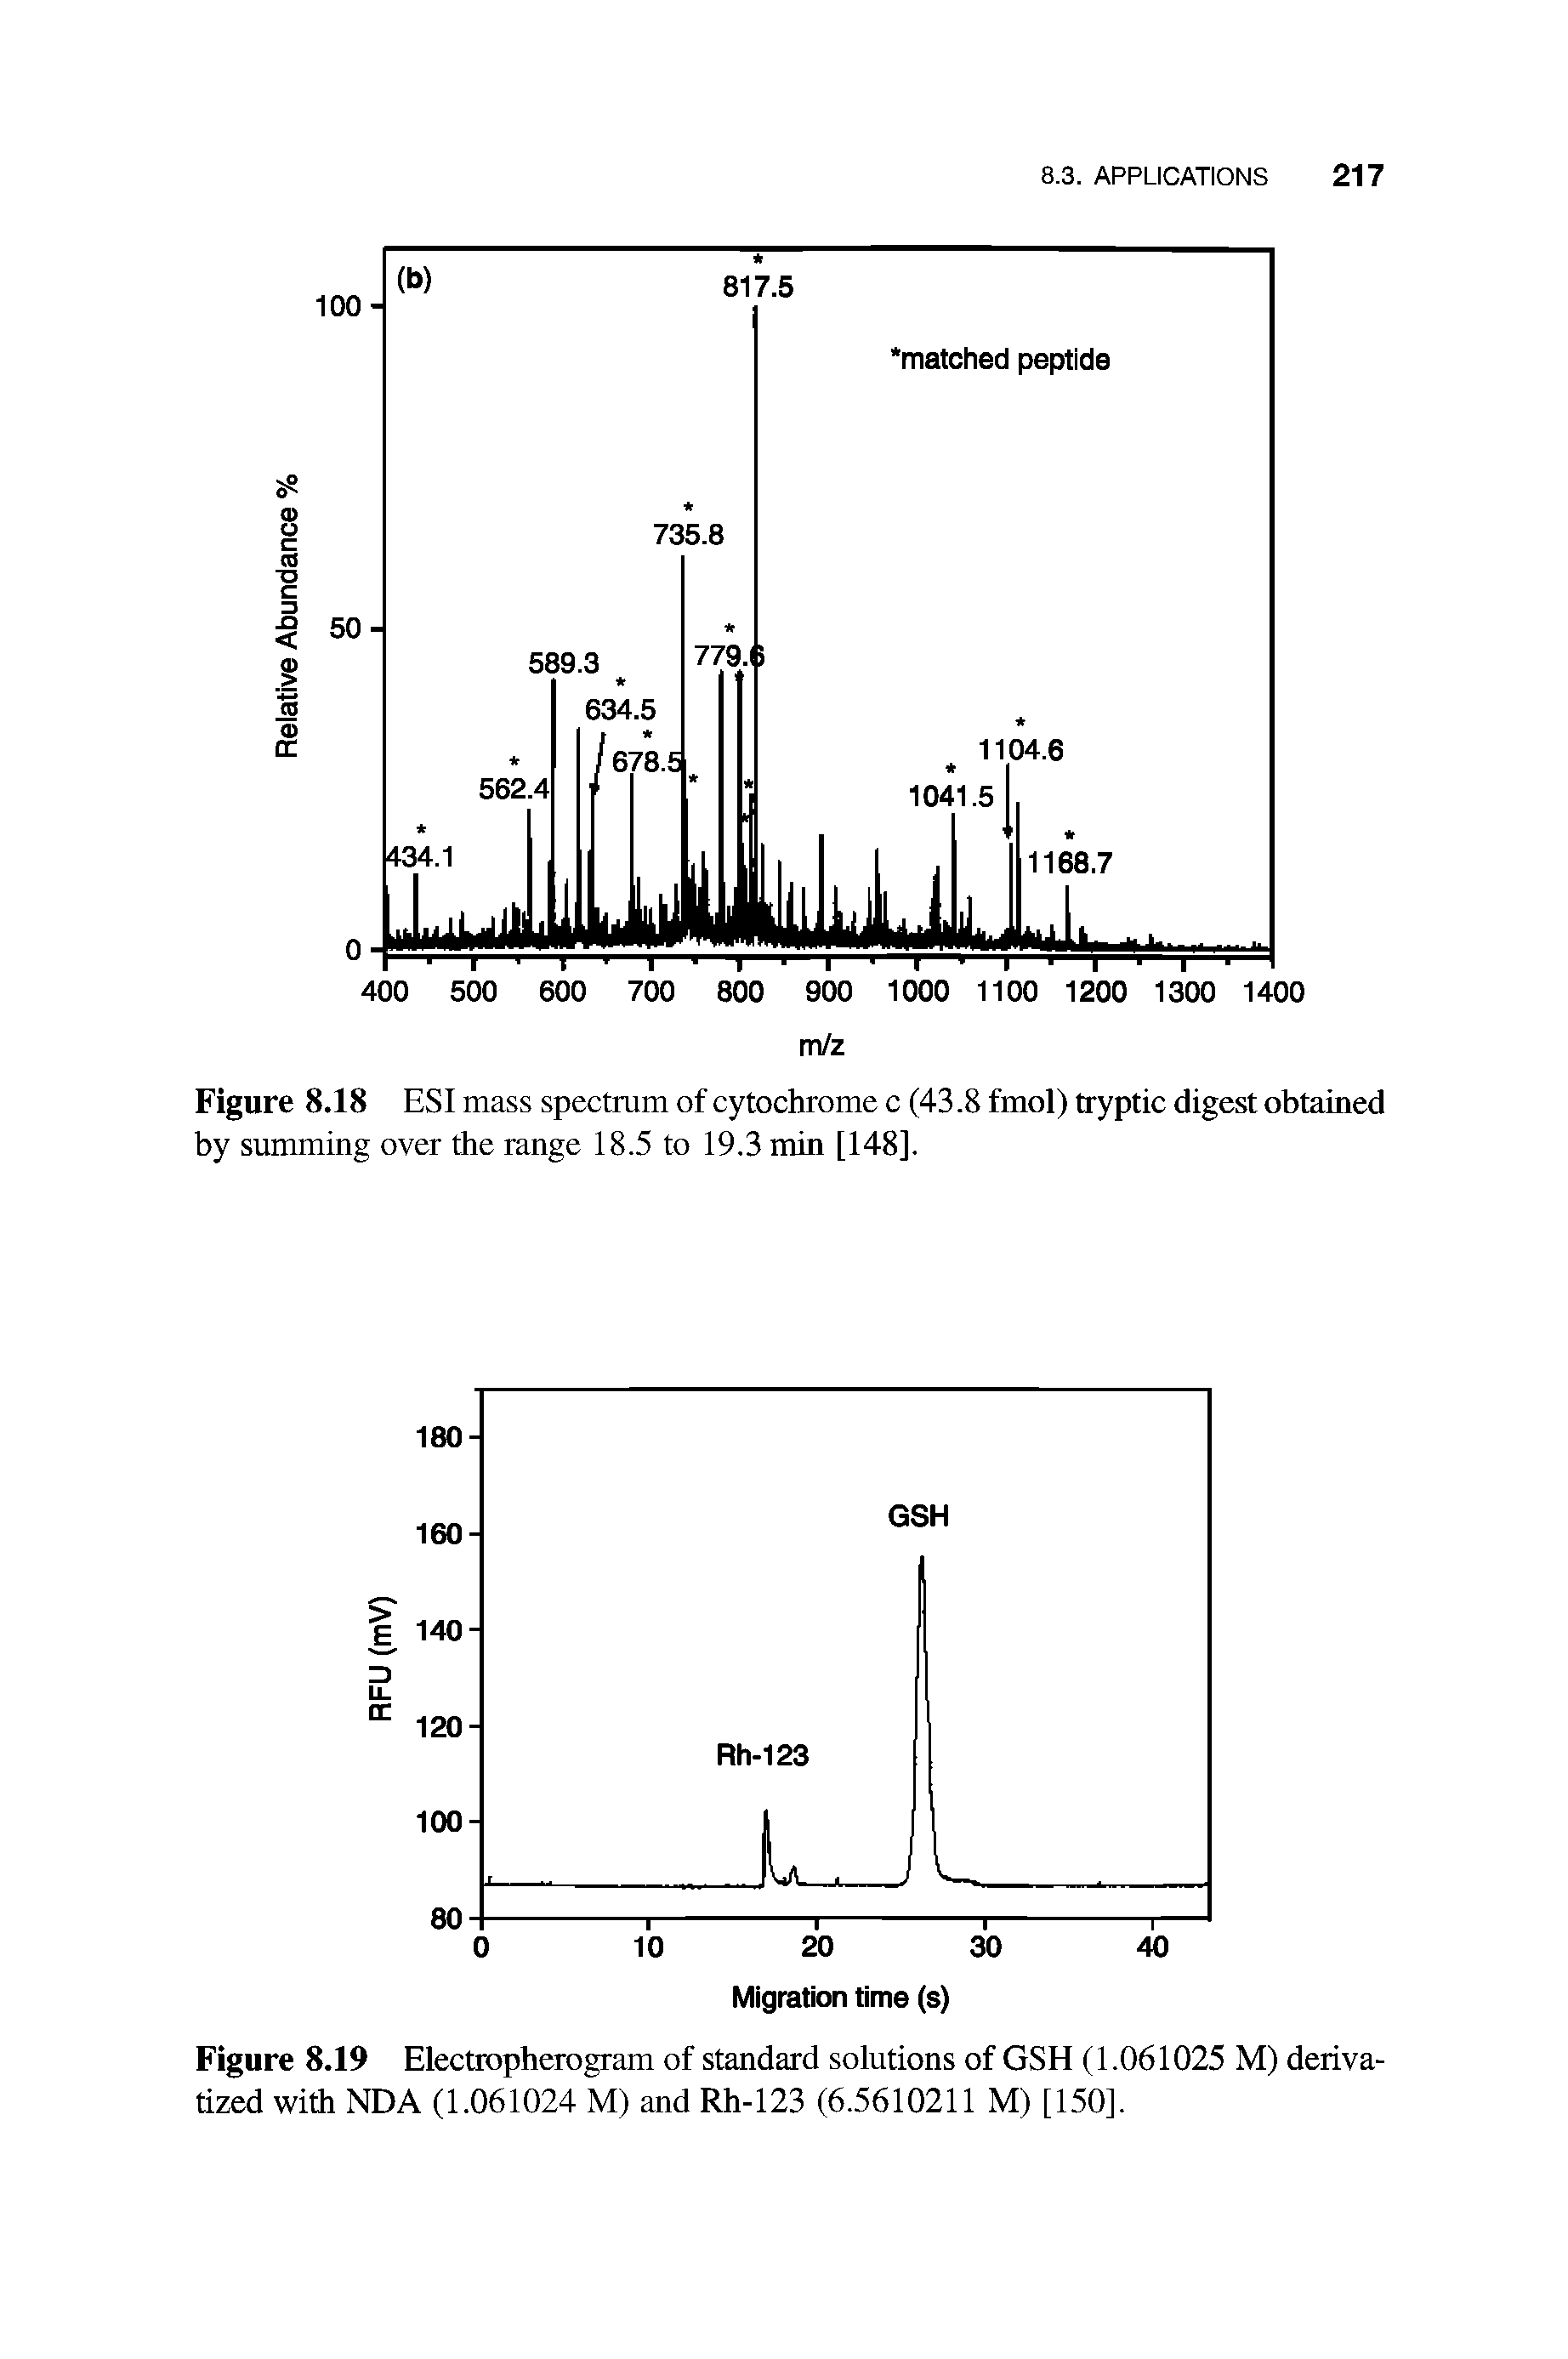 Figure 8.18 ESI mass spectrum of cytochrome c (43.8 fmol) tryptic digest obtained by summing over the range 18.5 to 19.3 min [148].